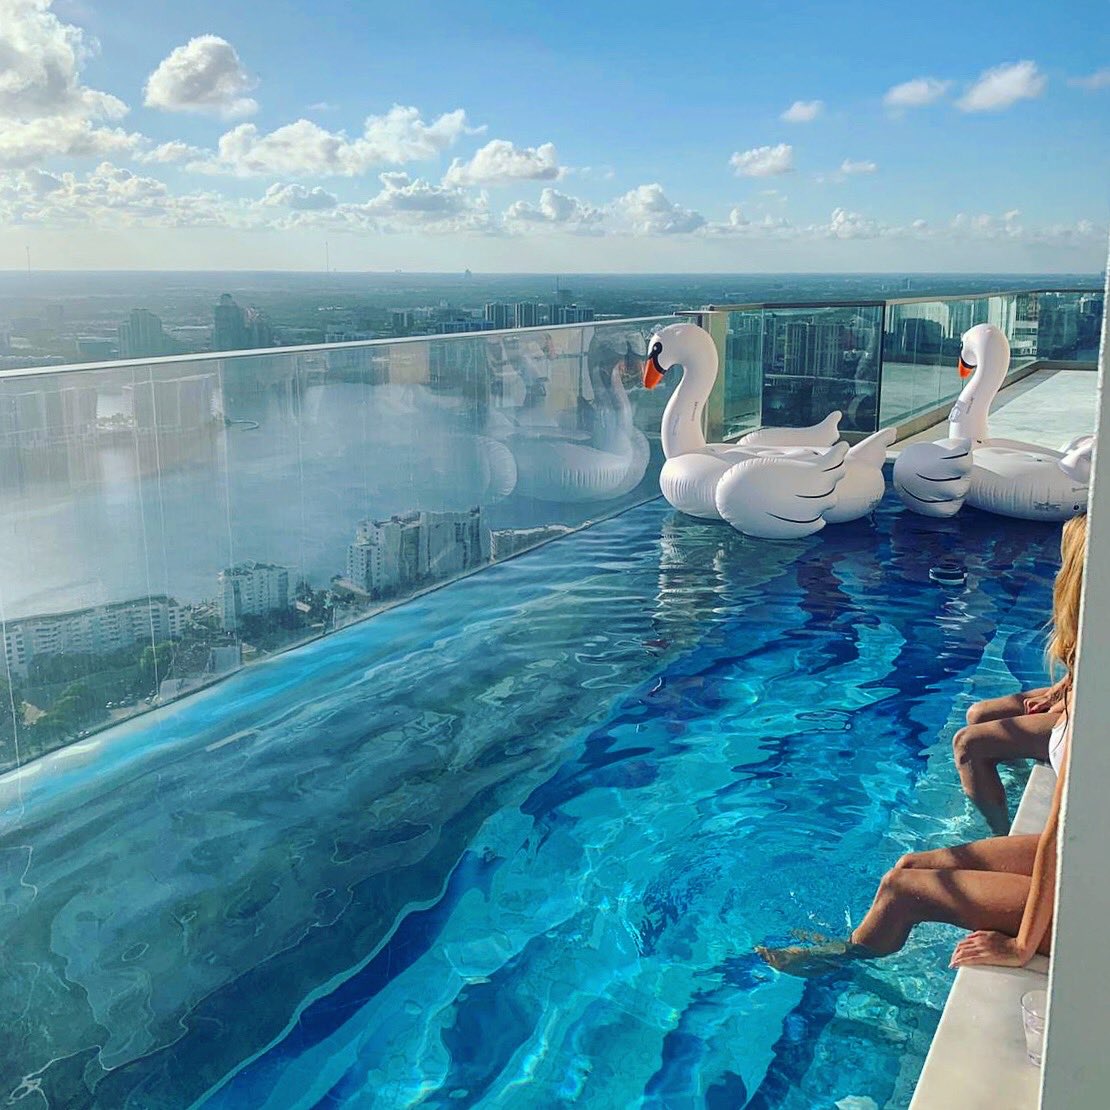 First Peek 👀 at Penthouse 47 @
📍Mansions at Acqualina 🤩
Would you Jump in this Glass Pool?💦
• 4 Bedrooms + 7 Baths
• 9,350 SF
• Two Grand Salons
• Covered Terrace Pool
• Furnished by Luxury Living #FENDICASA 🔹$38,000,000🔹
@AcqualinaResort @EstatesACQ #miamirealestate